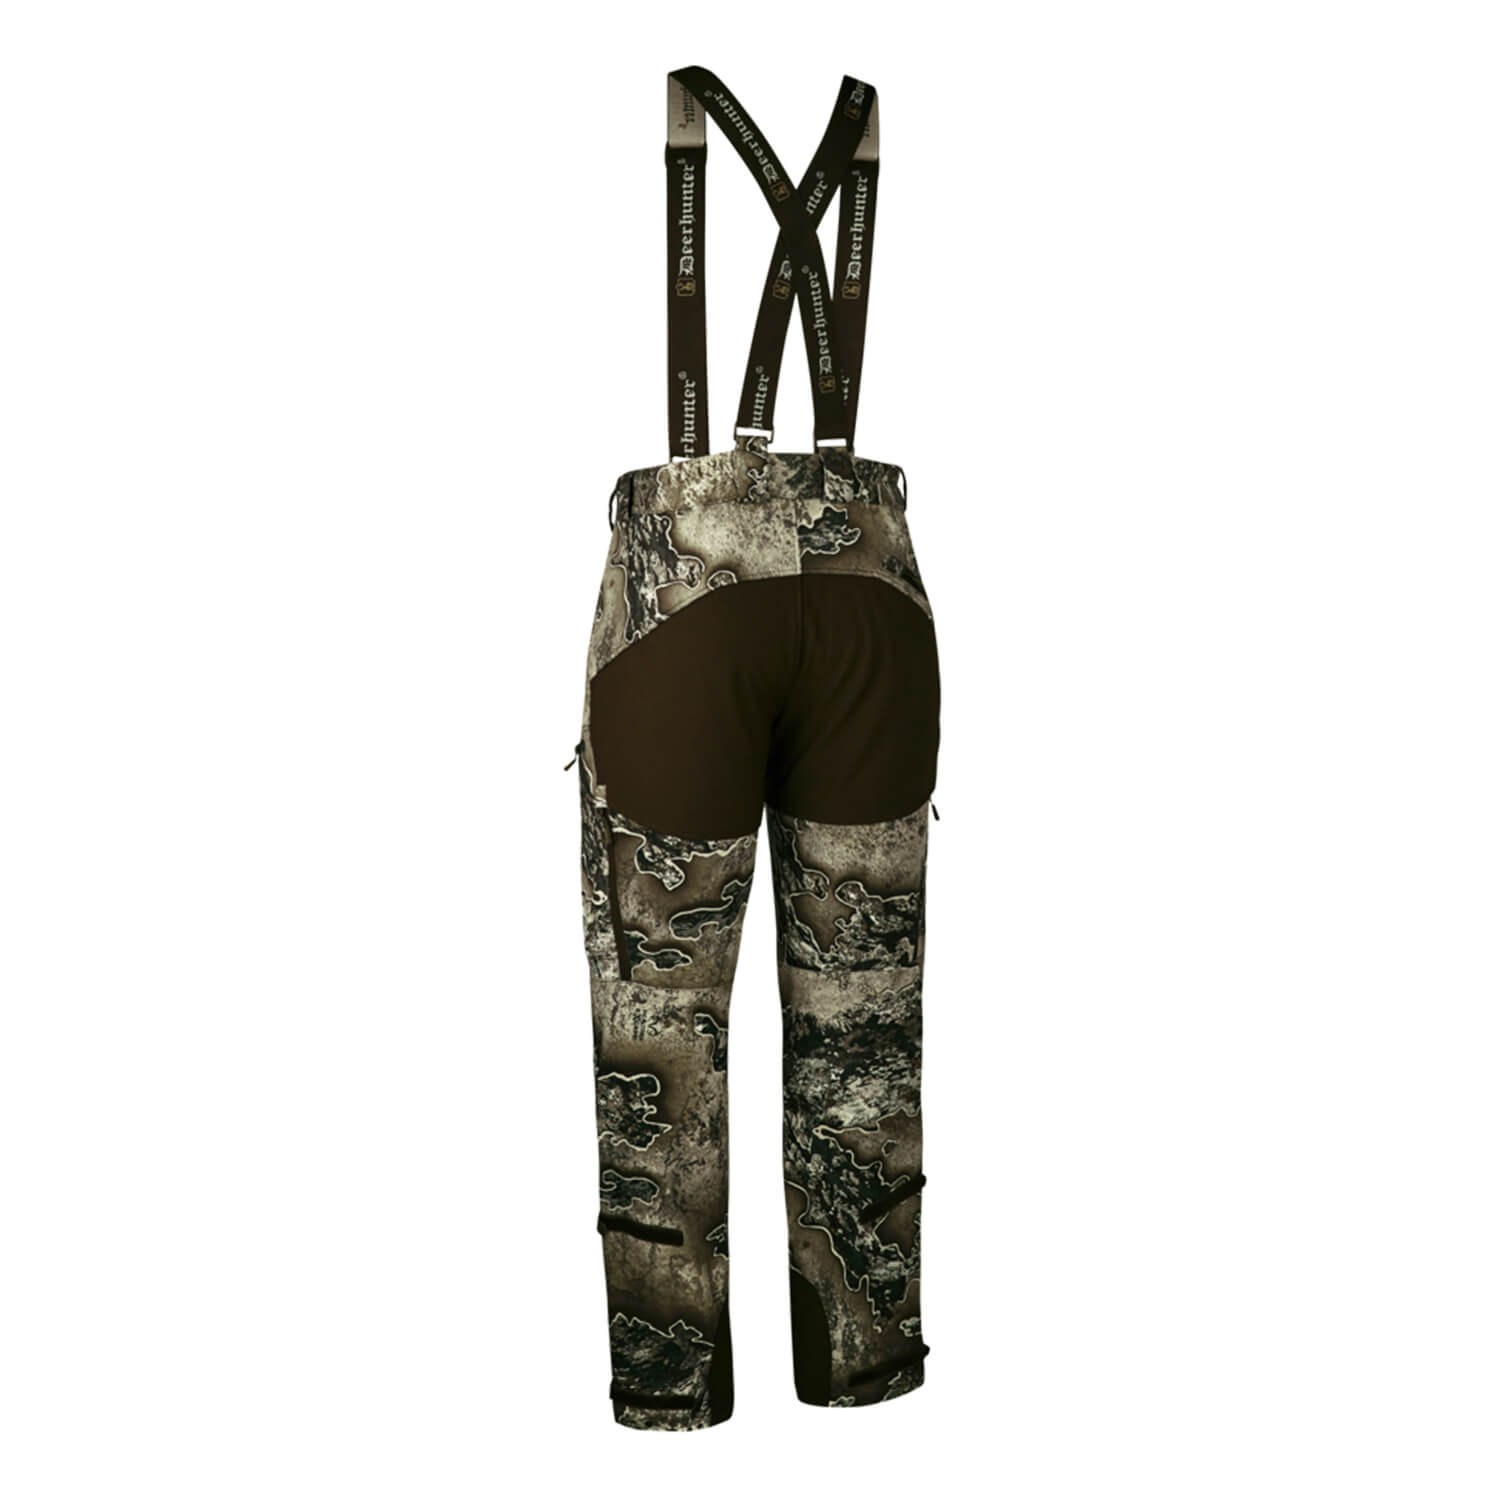 Deerhunter Softshell Trousers Excape Light (Realtree Excape)